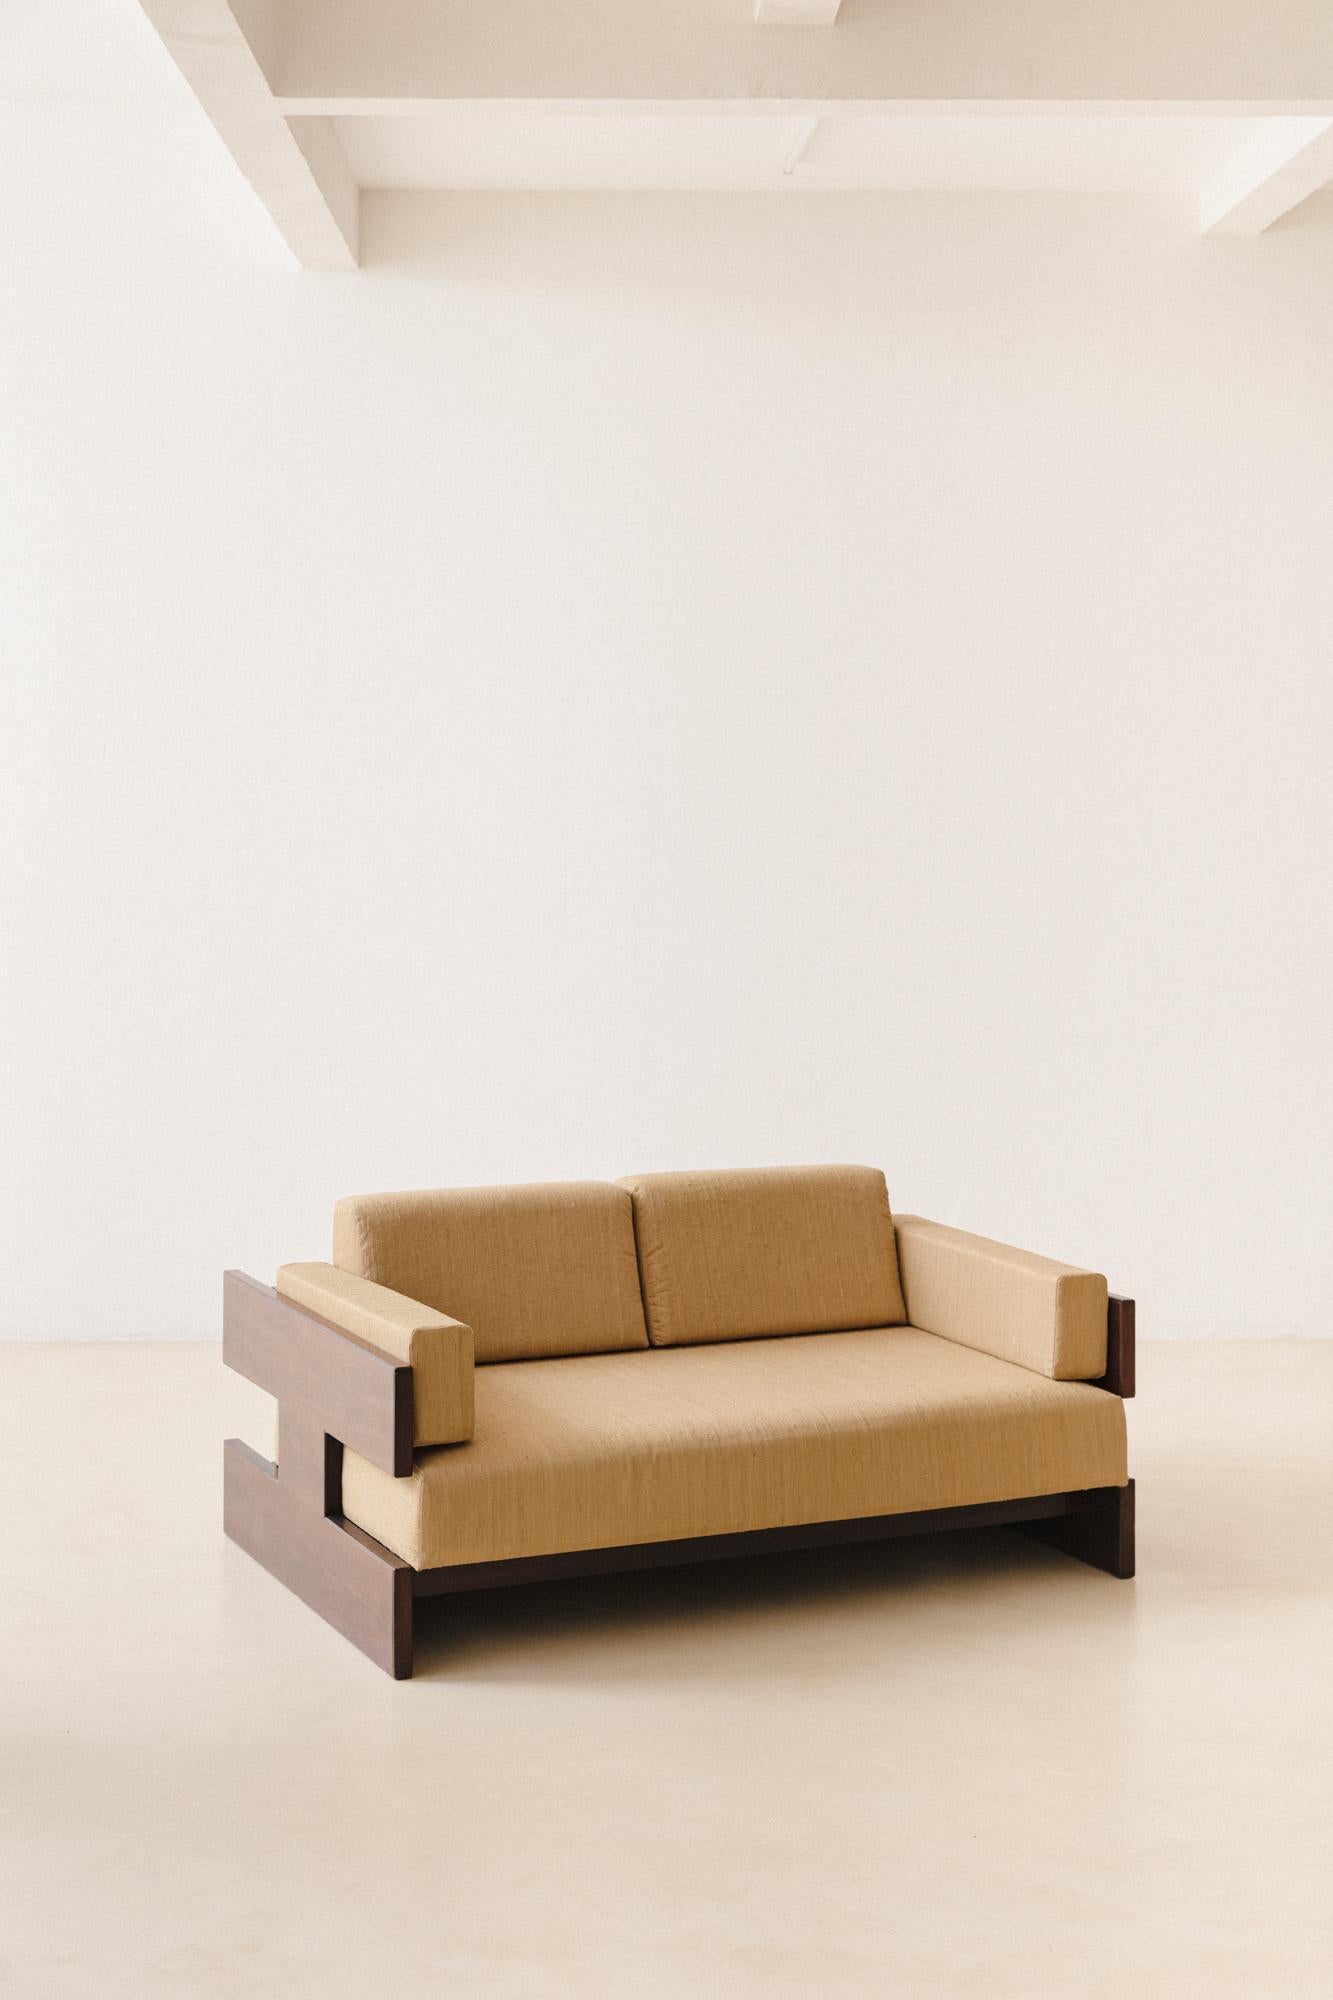 This sofa was produced by the Brazilian company Celina Decorações in the 1960s. The piece is made of Imbuia wood, with seats and backs upholstered with a gorgeous 100% organic silk fabric from our collection Bossa Fabrics.

The armrests have a